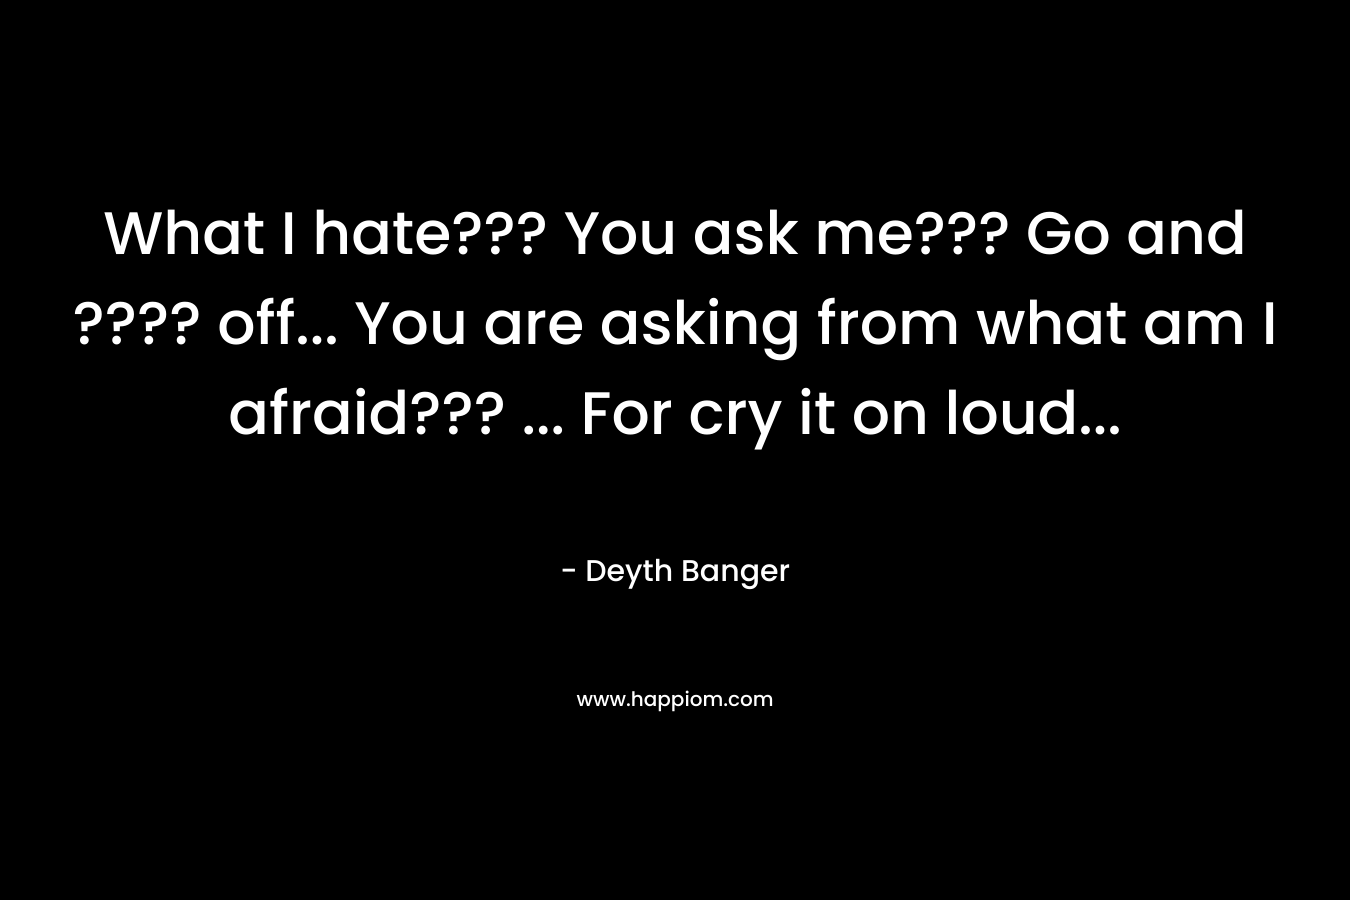 What I hate??? You ask me??? Go and ???? off... You are asking from what am I afraid??? ... For cry it on loud...